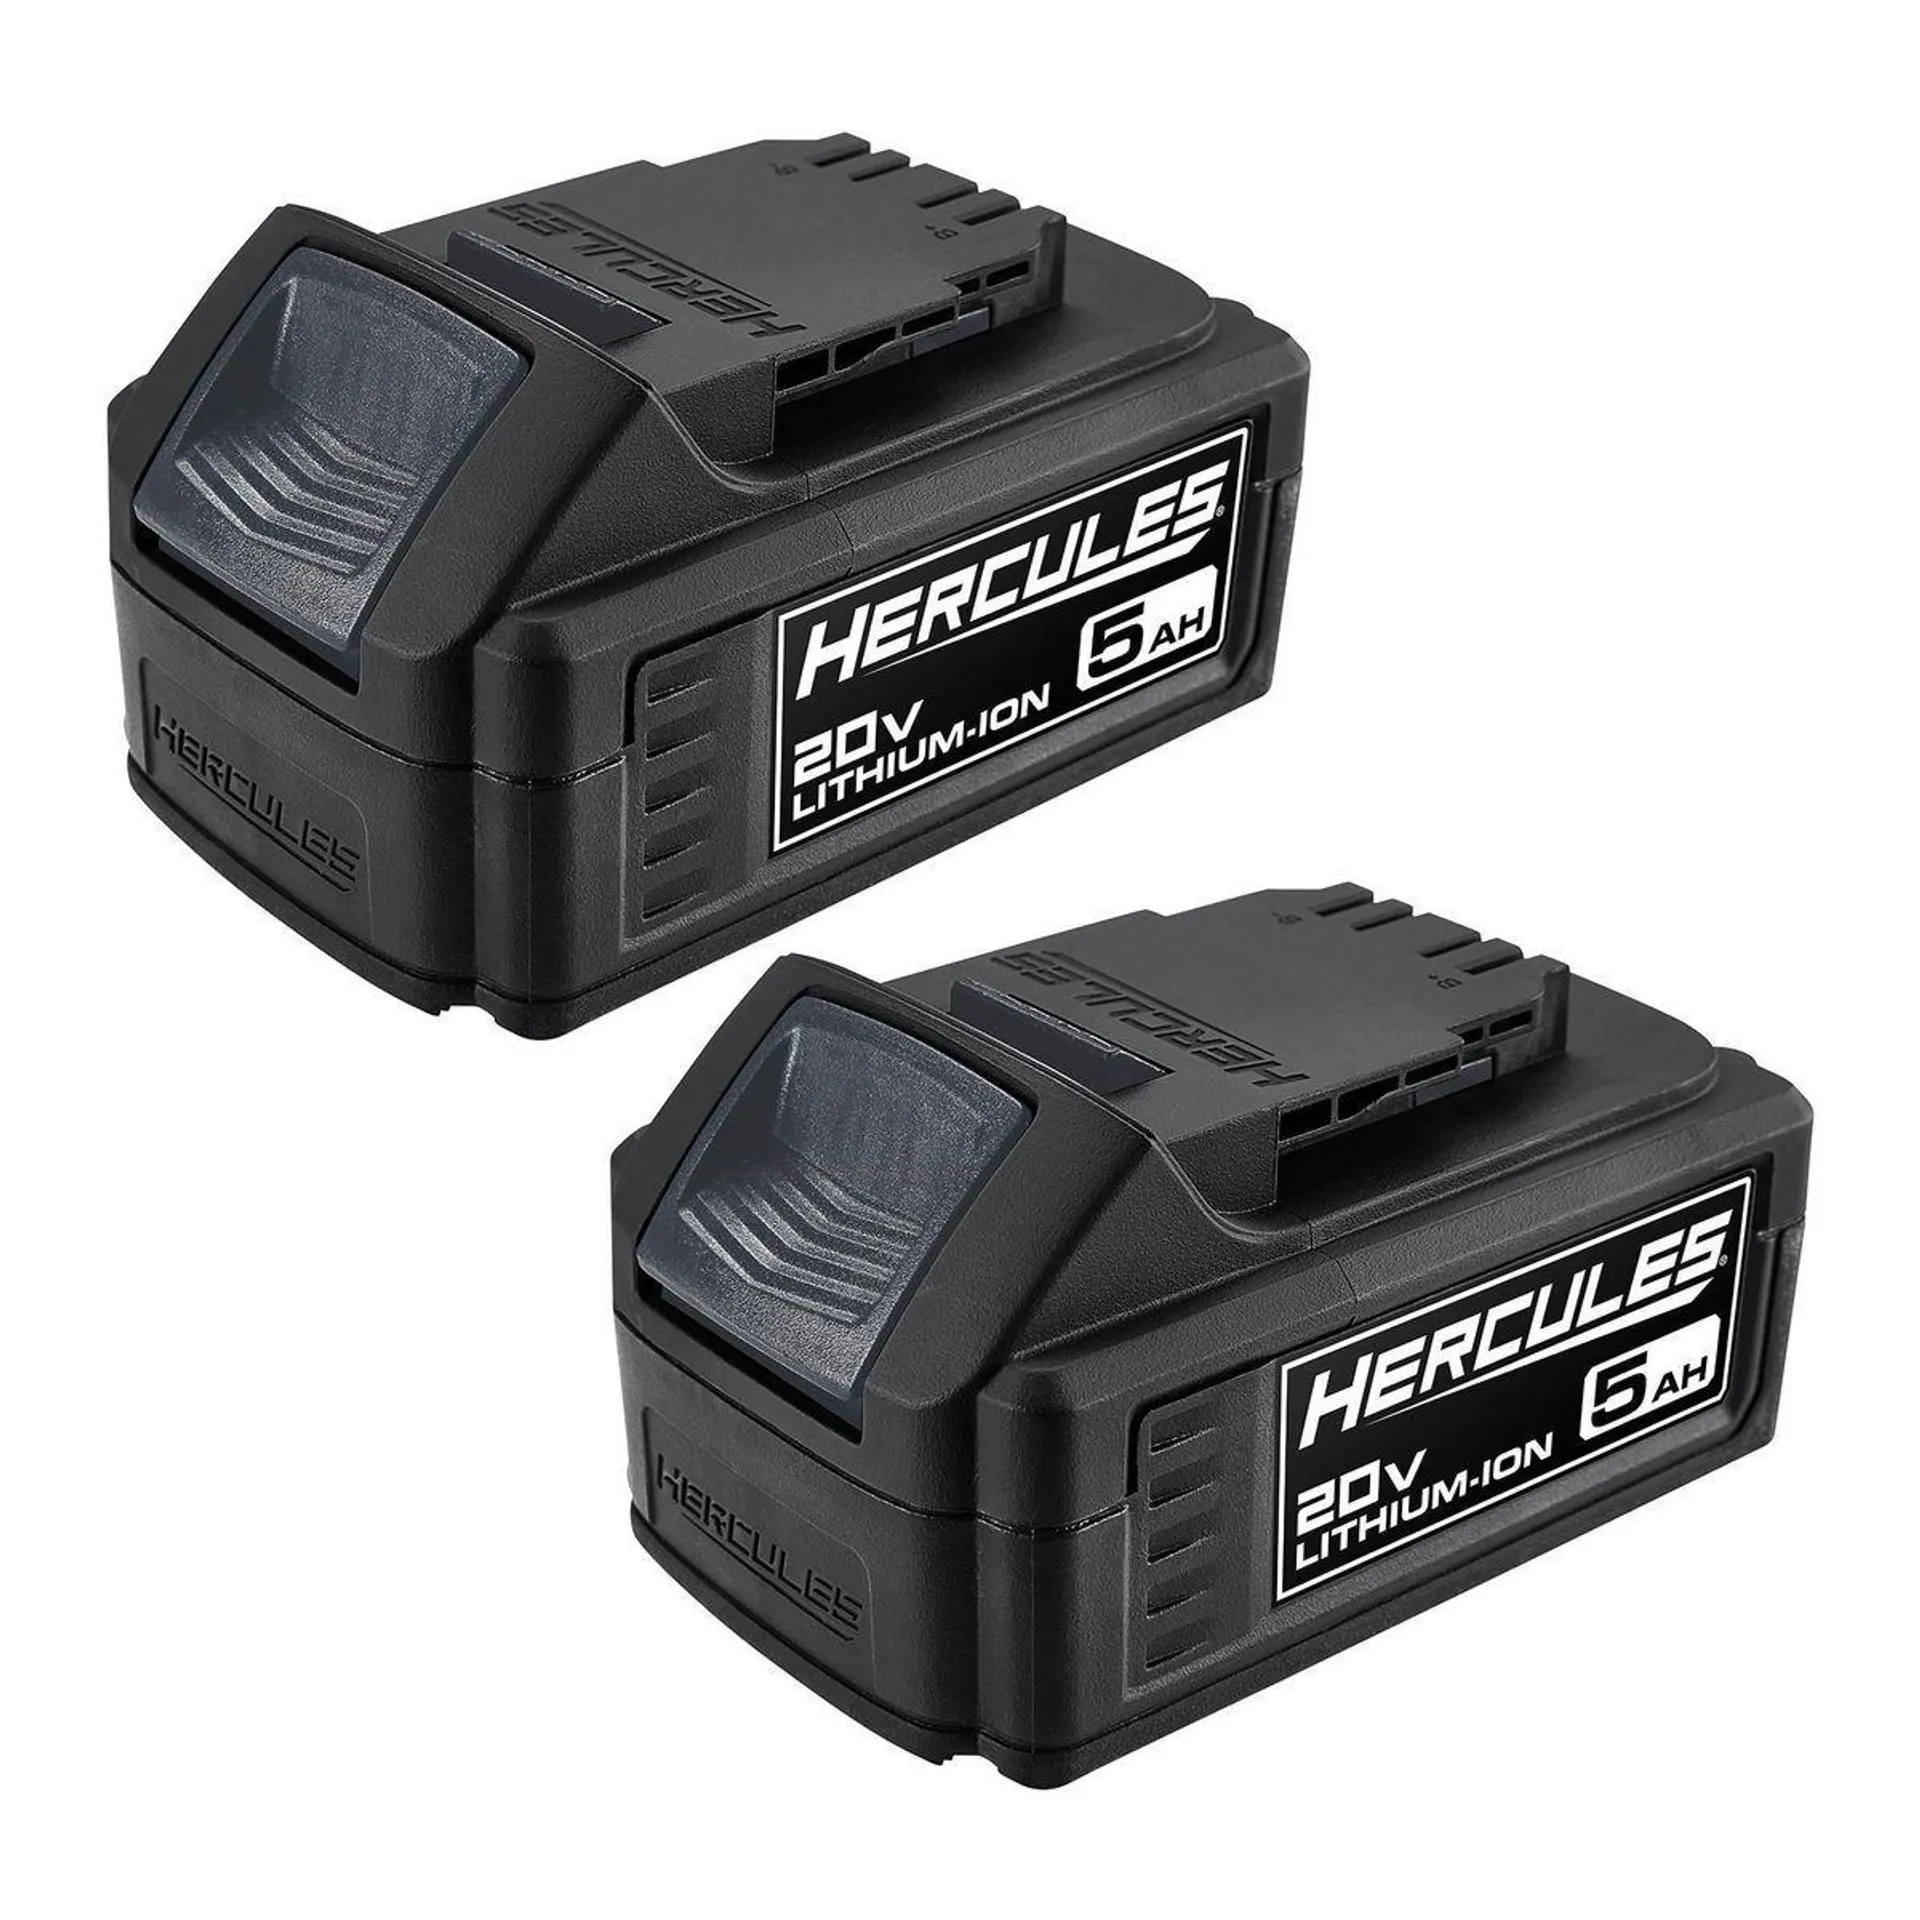 20V 5 Ah Extended-Performance Lithium-Ion Battery Bundle, 2-Pack